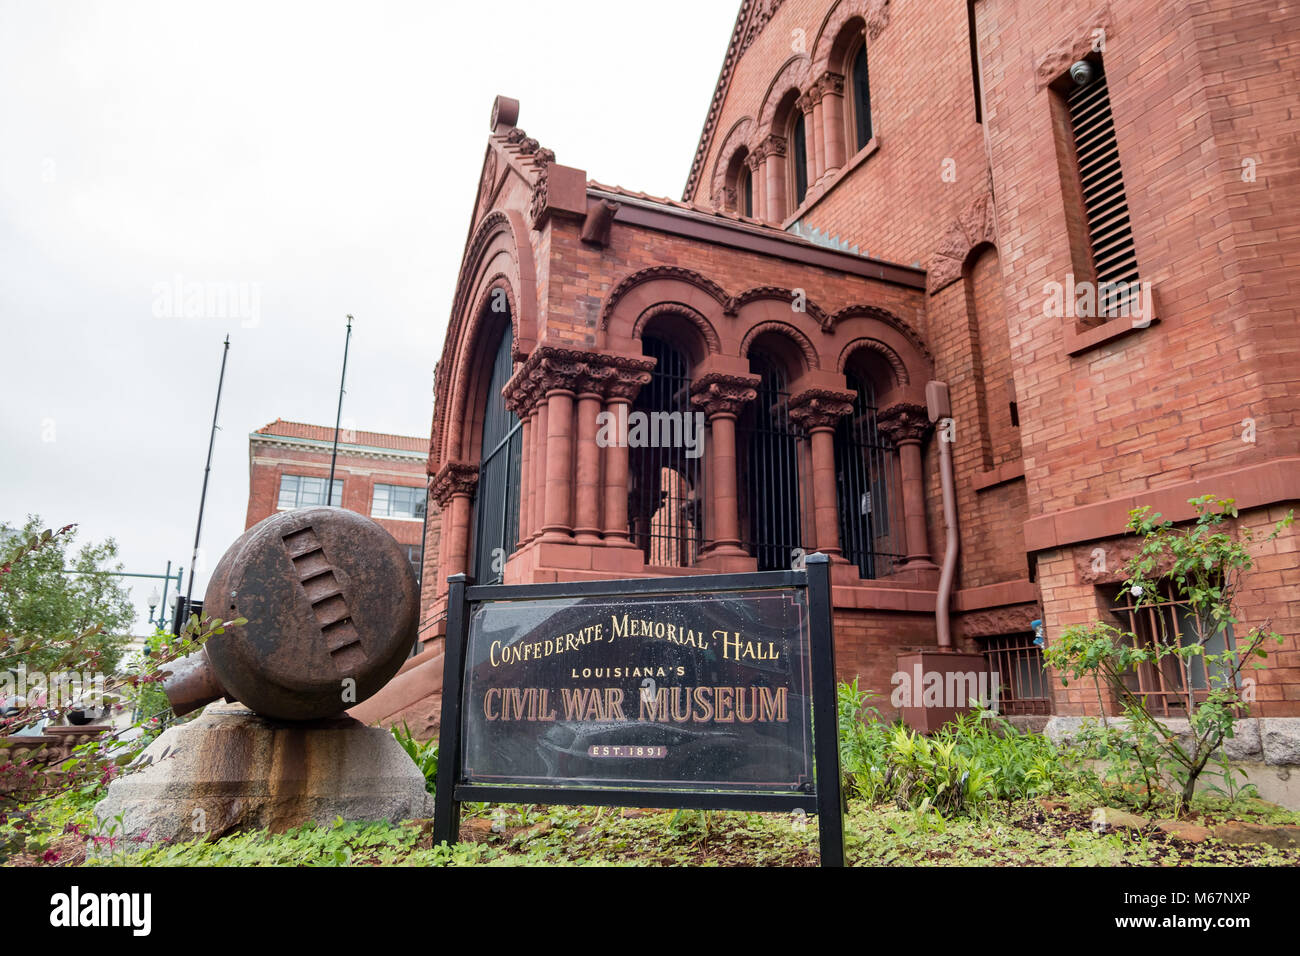 New Orleans, FEB 25: Exterior view of the beautiful Civil War Museum on FEB 25,2018 at New Orleans, Louisiana Stock Photo